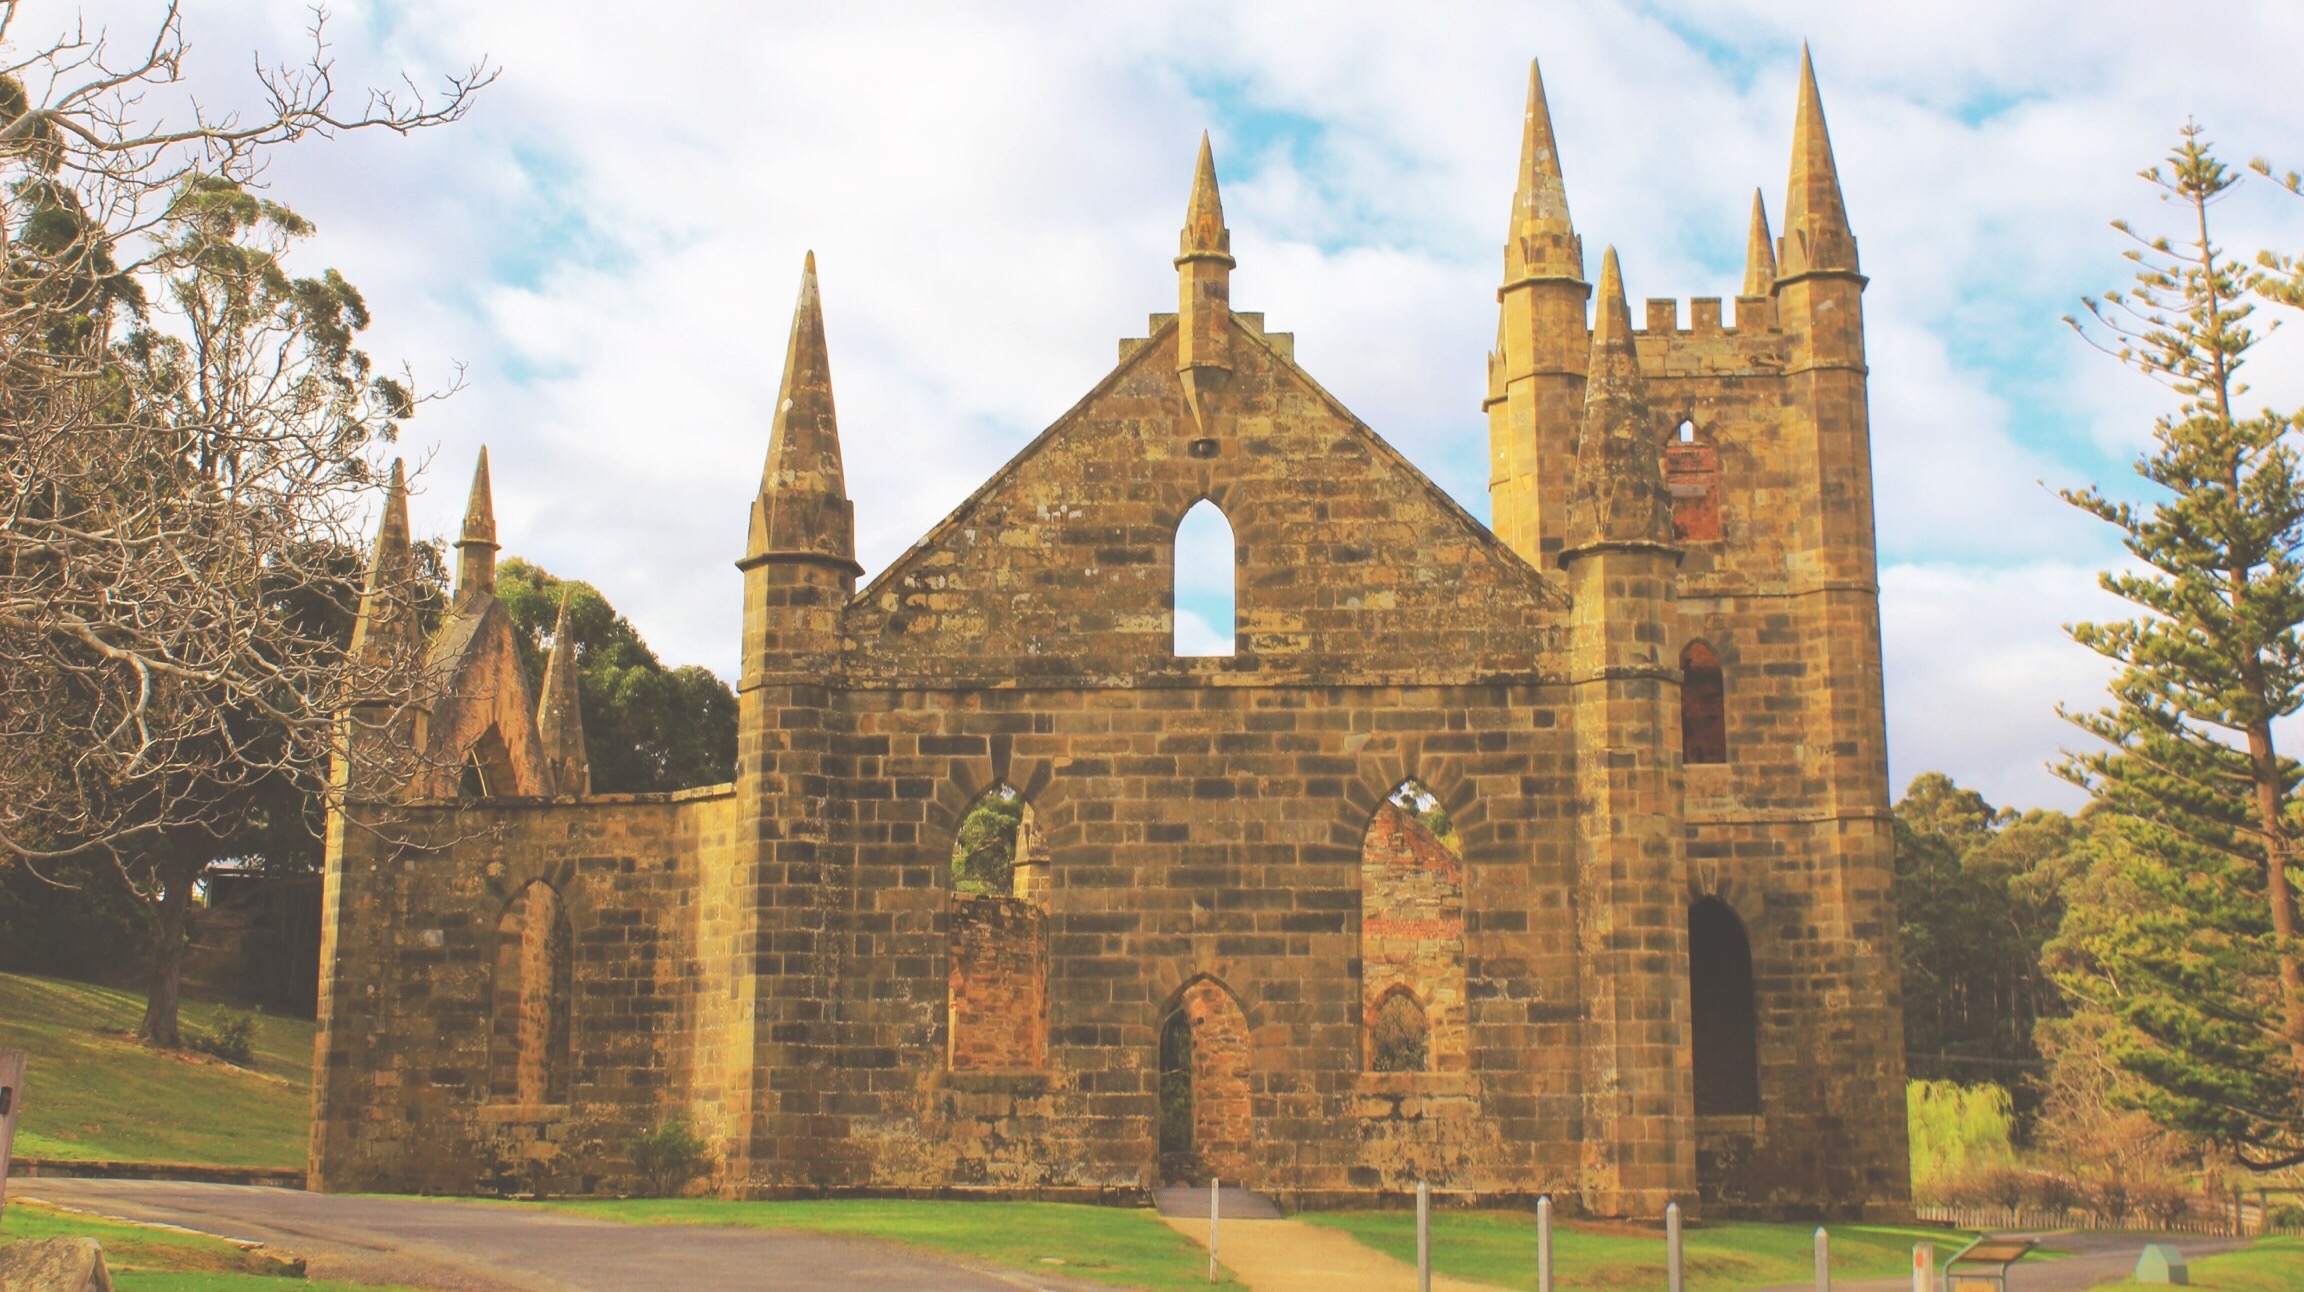 Stepping back in time, become a Convict at Port Arthur, Tasmania